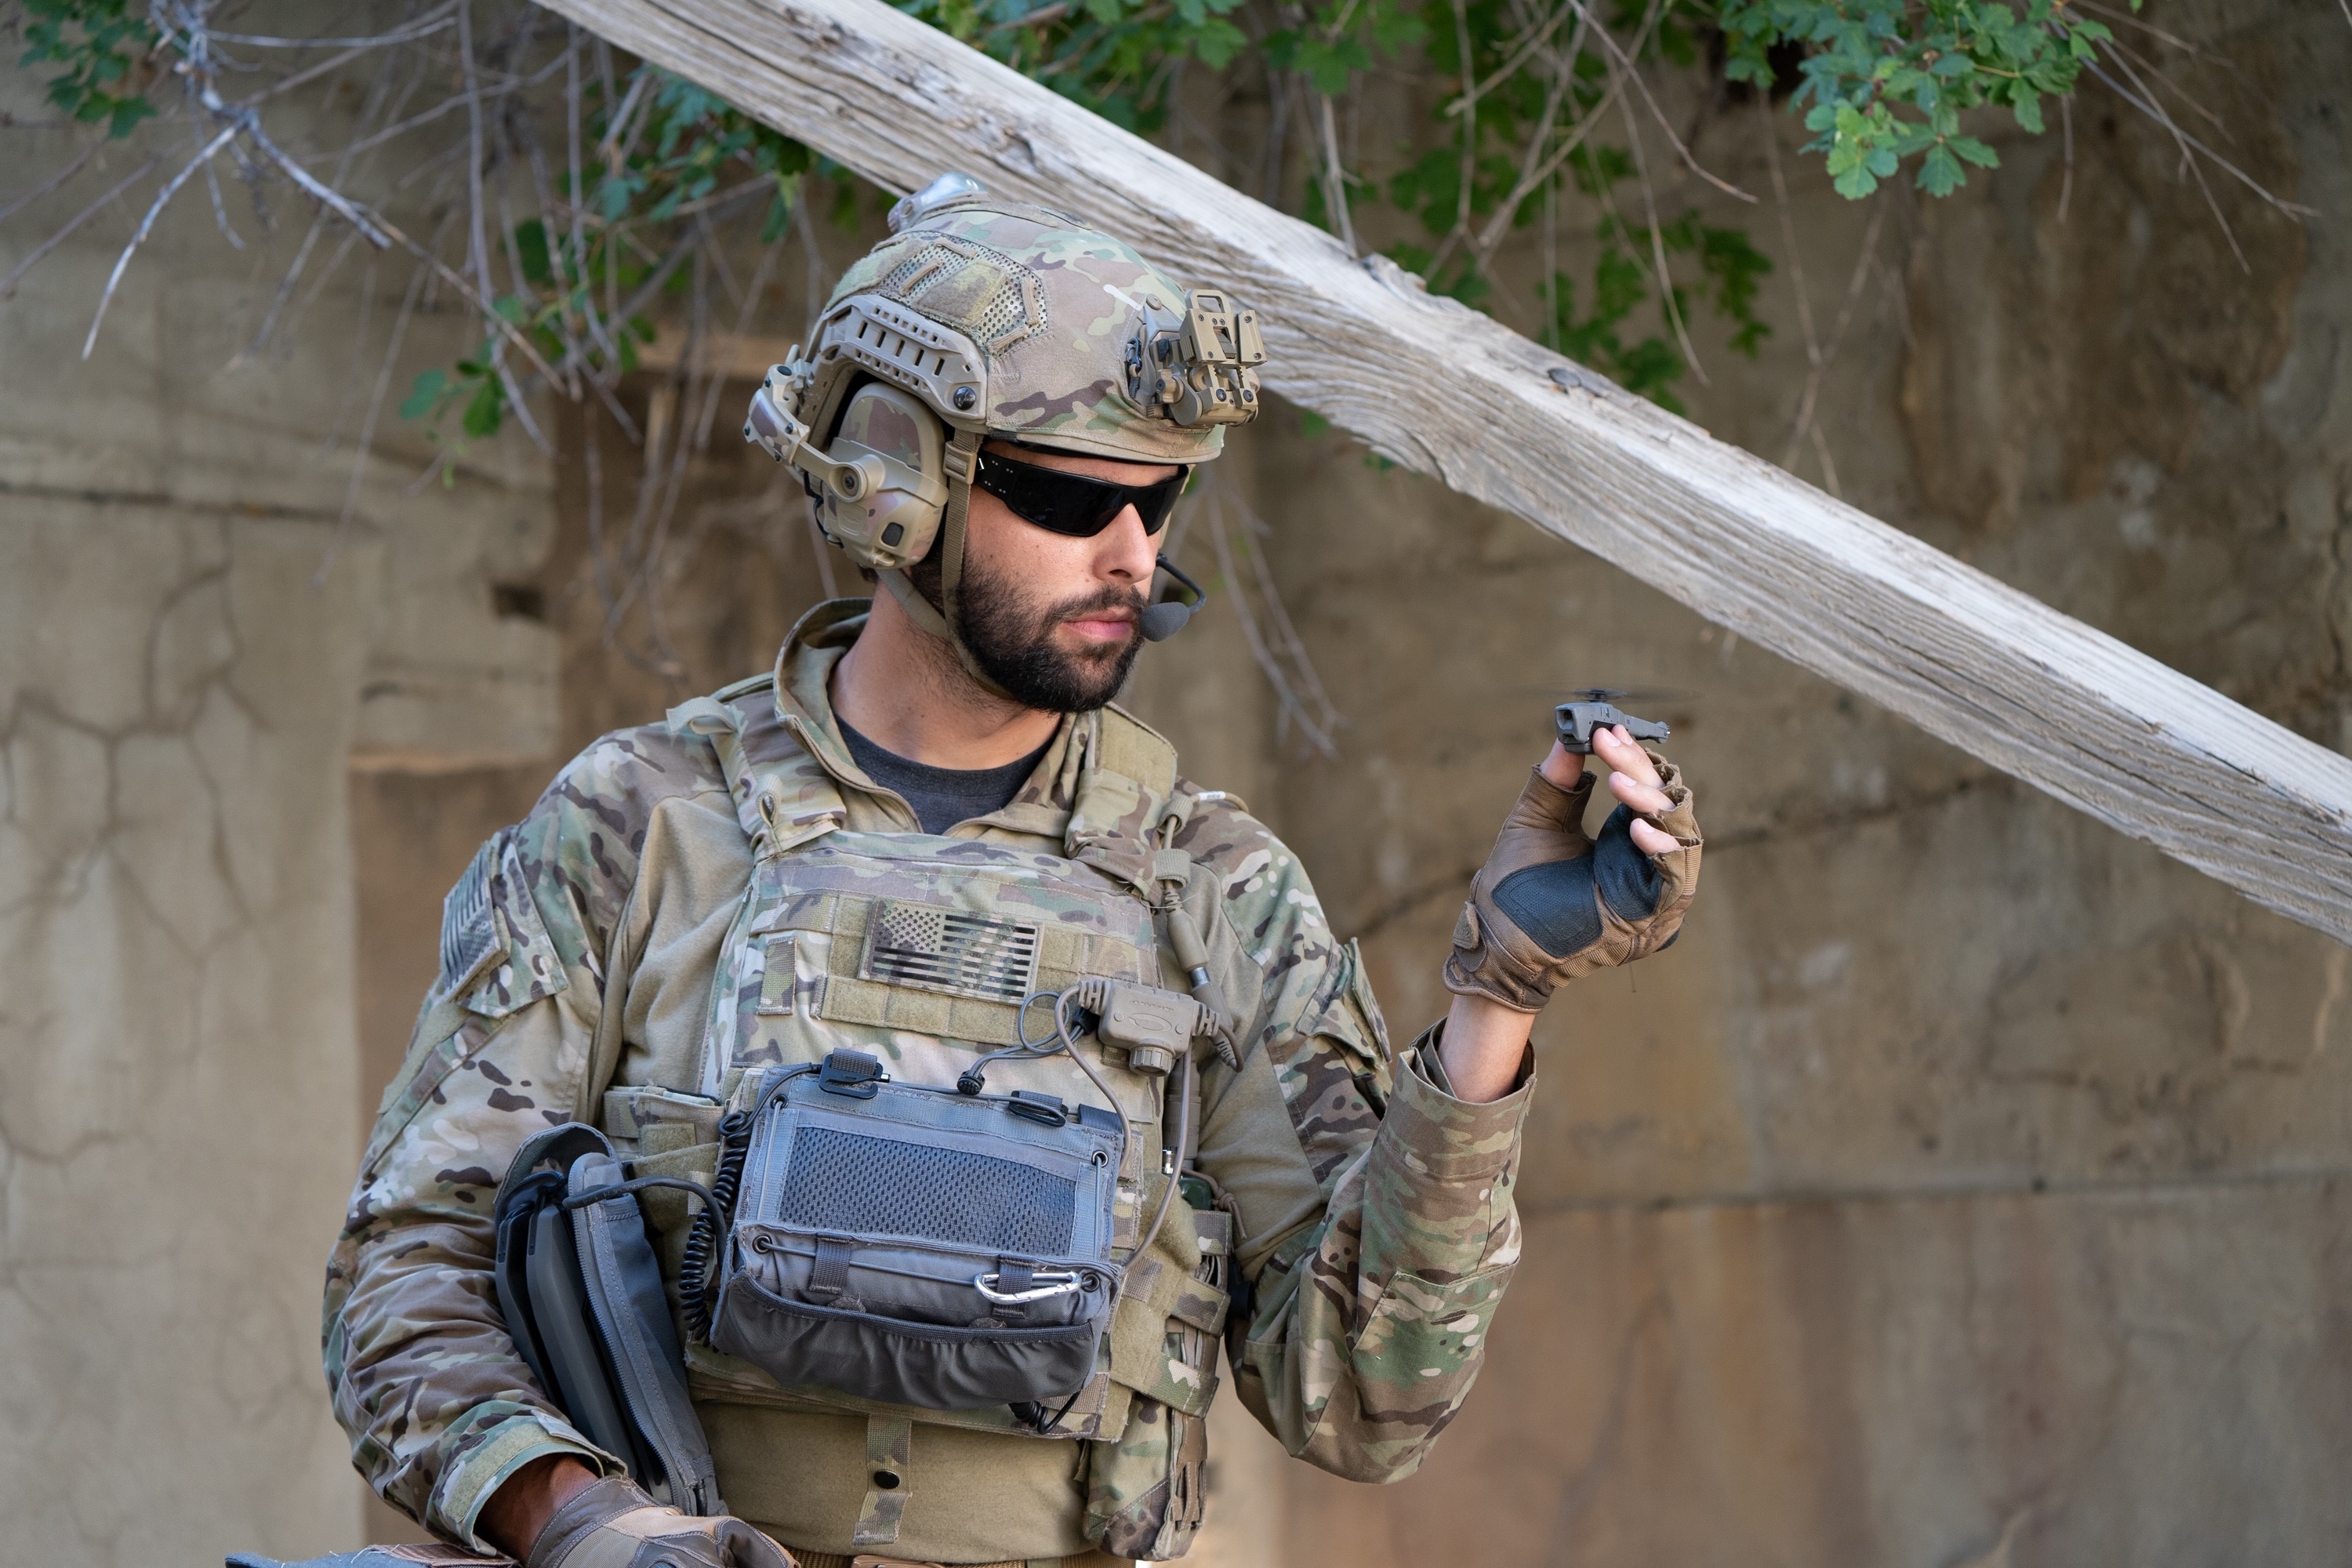 Extremely light, nearly silent, and with a flight time up to 25 minutes, the combat-proven, pocket-sized FLIR Black Hornet transmits live video and HD still images back to the operator. Its information feed provides soldiers with immediate covert situational awareness to help them perform missions more effectively. FLIR has delivered more than 12,000 Black Hornet nano-UAVs to defense and security forces worldwide